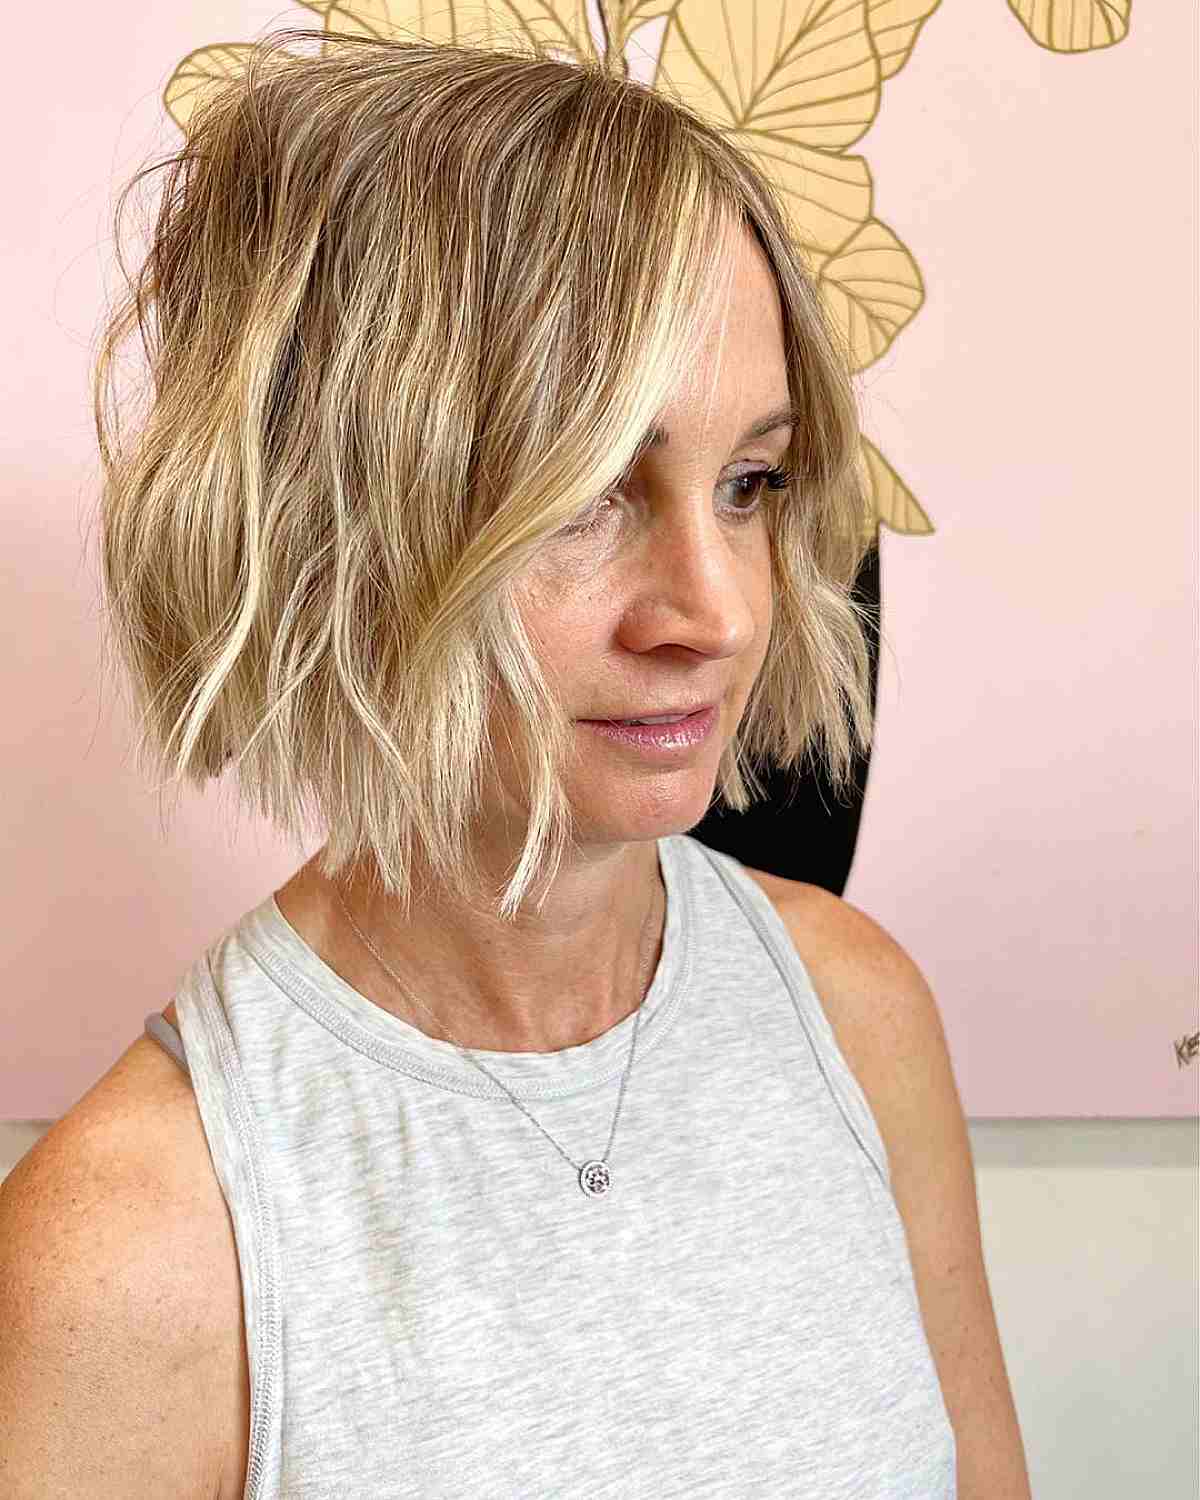 Chin-Length Choppy Bob with Beach Waves for Women Over 40